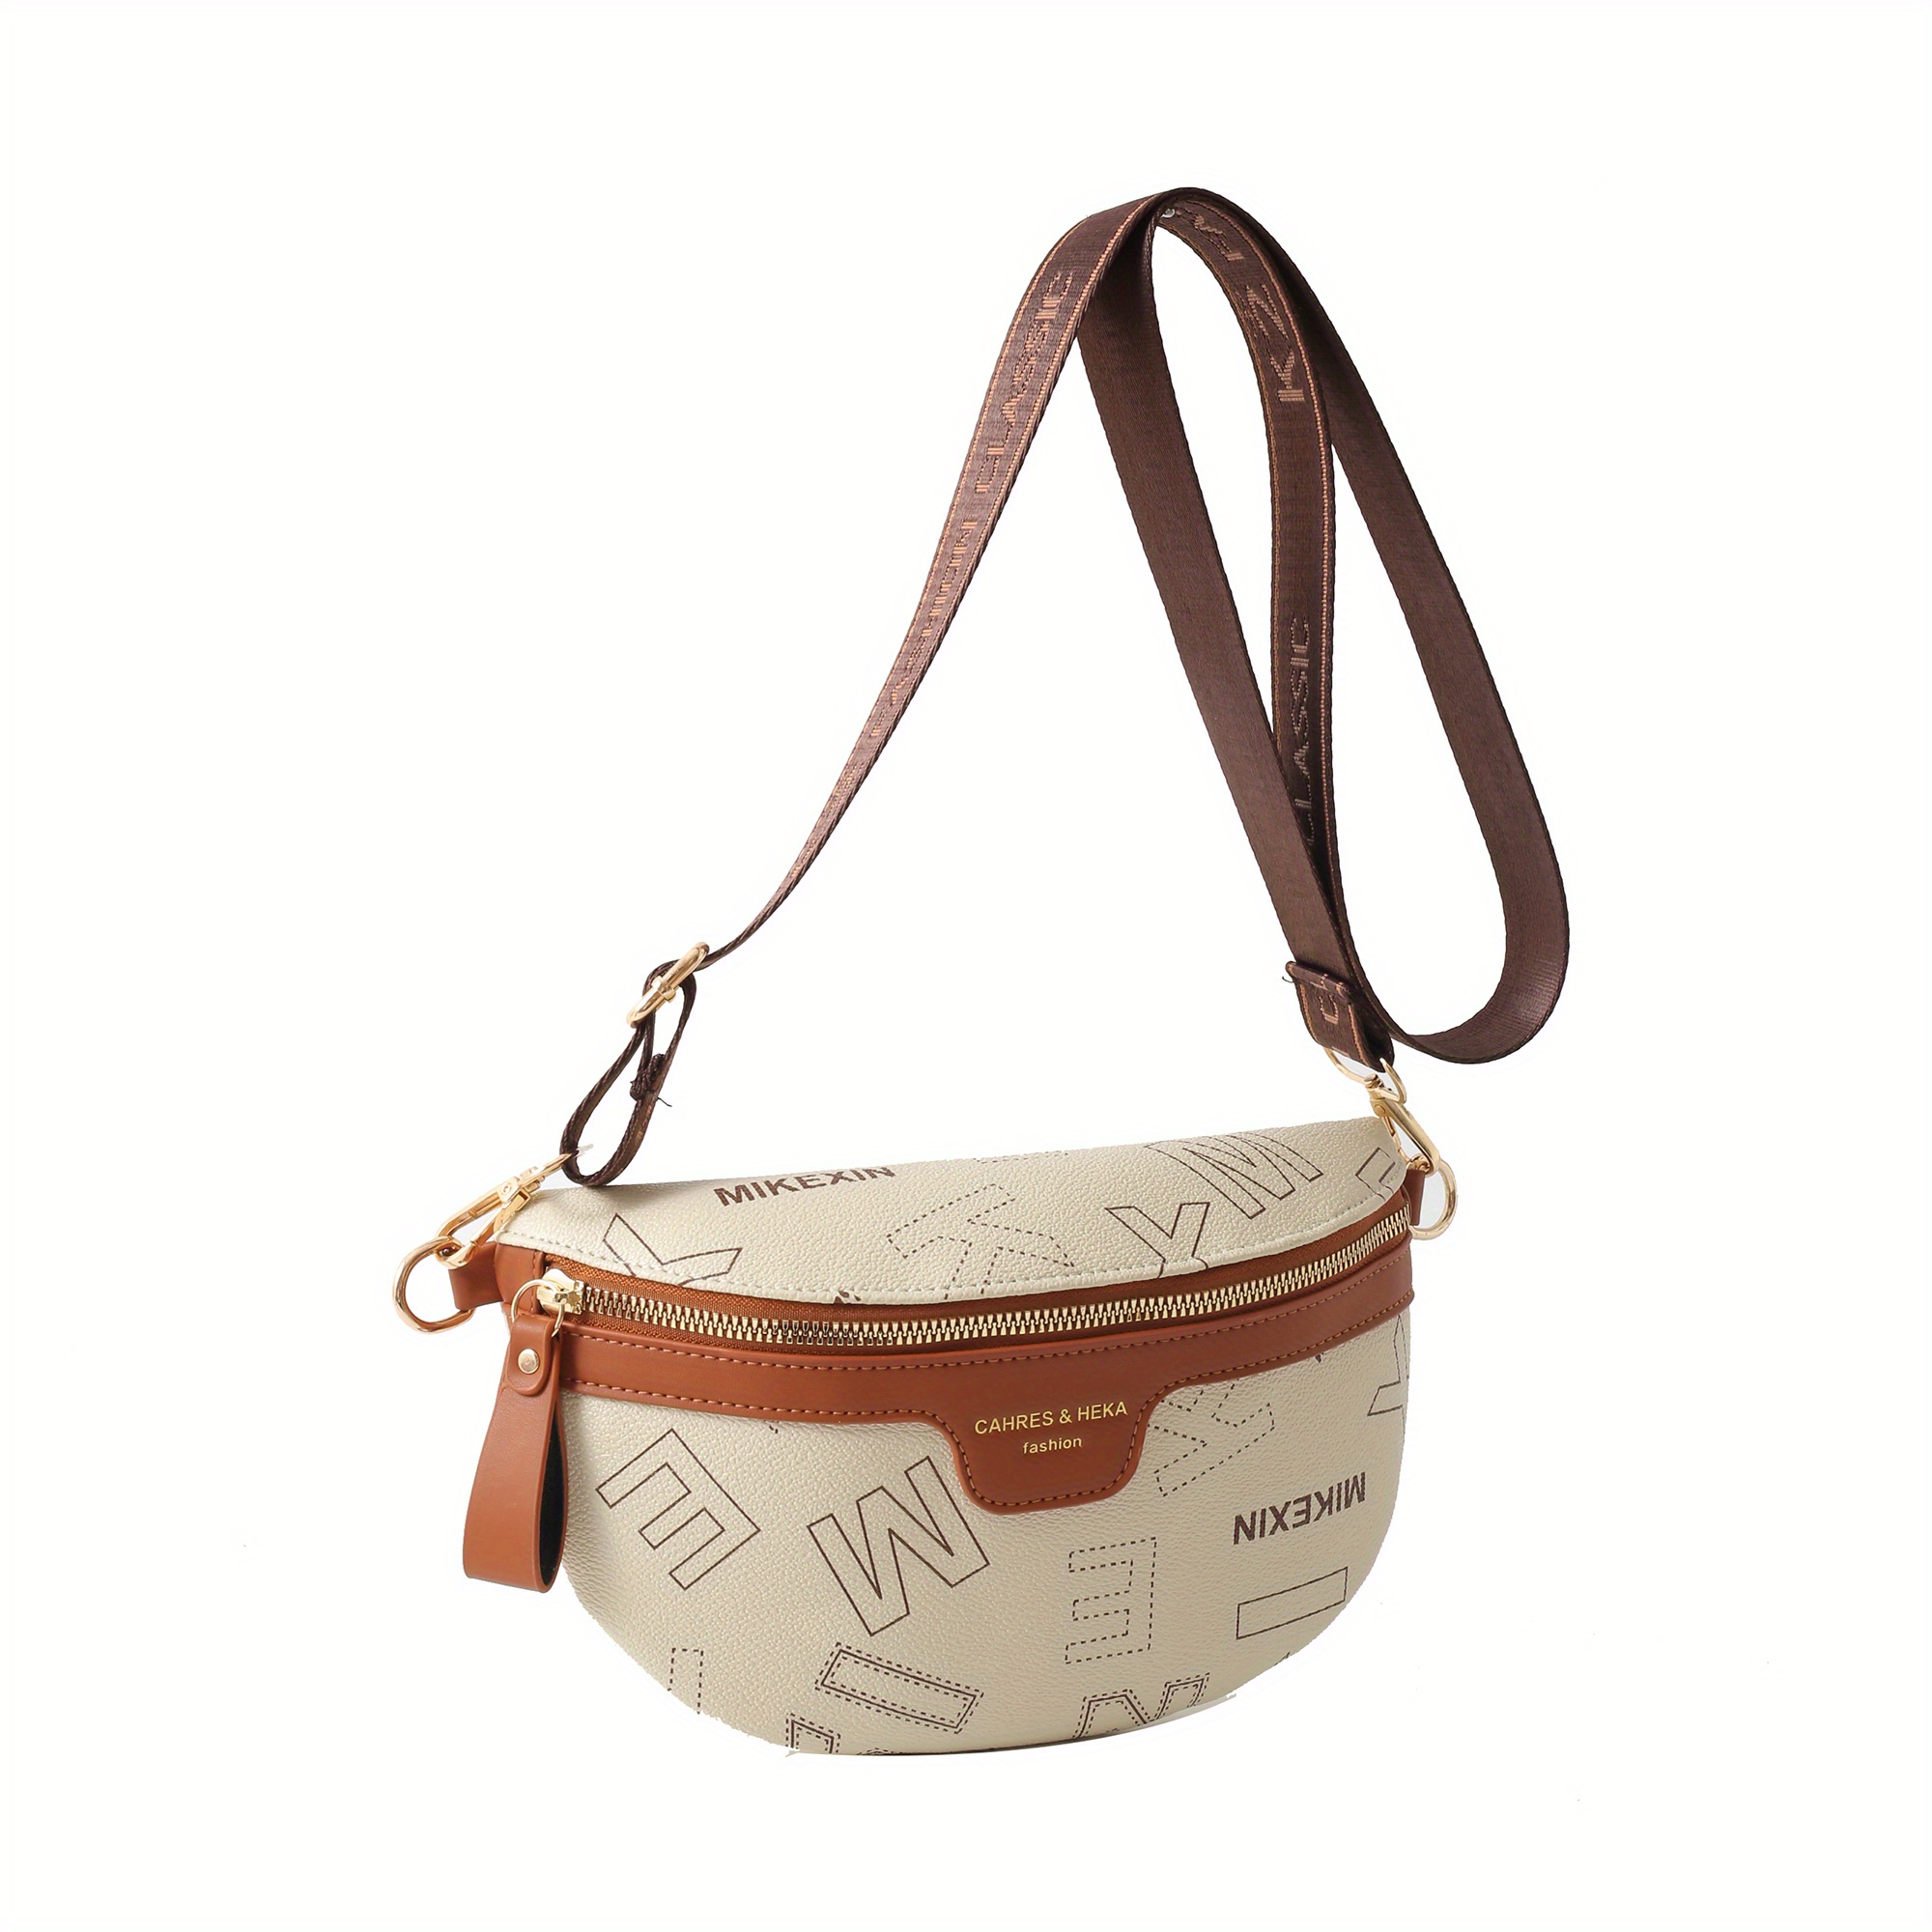 Letter Graphic Chest Bag With Coin Purse, Wide Strap Crossbody Bag